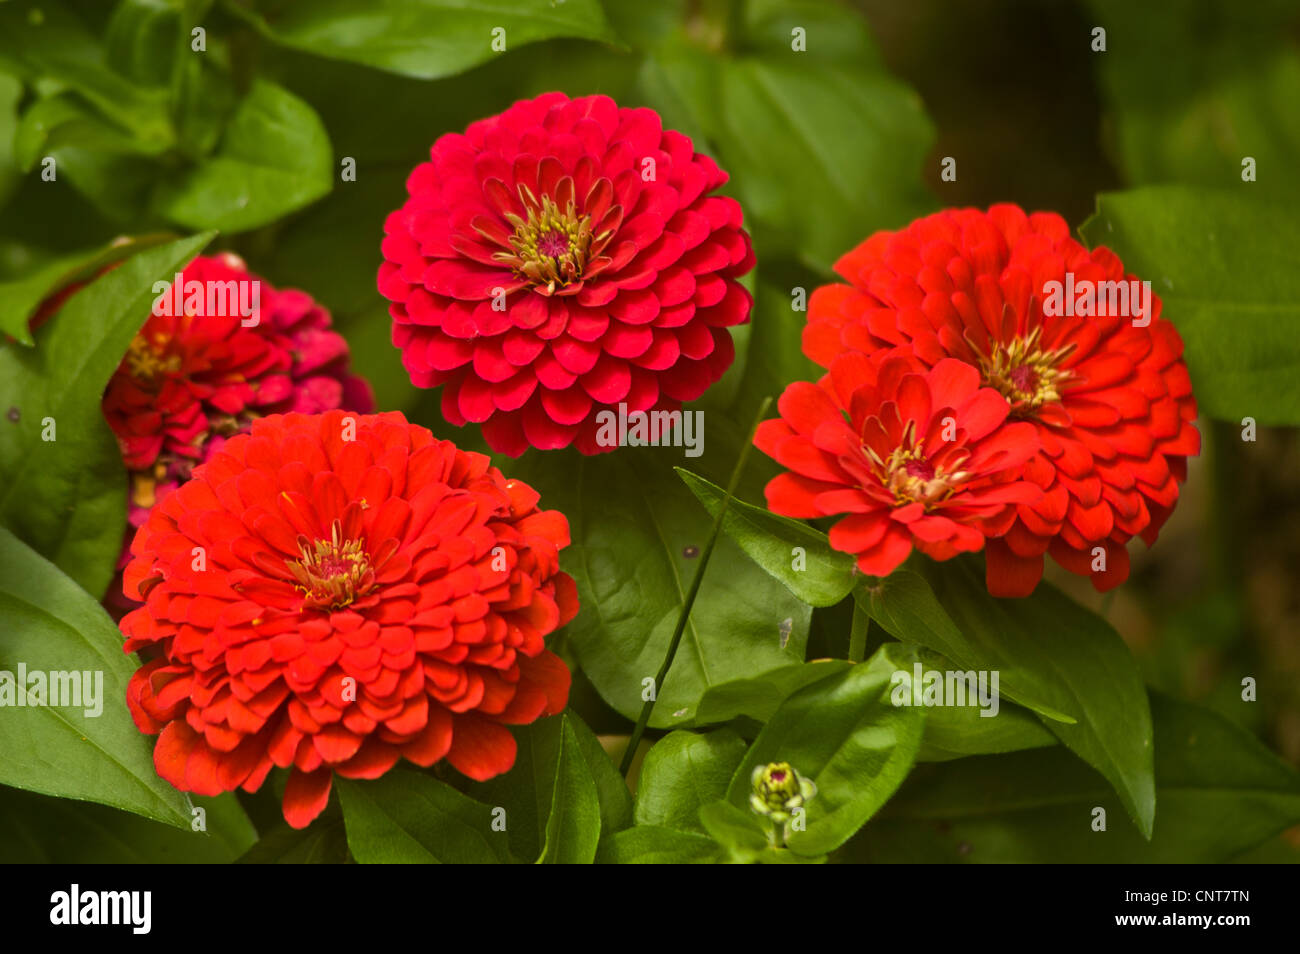 Red Flowers Of Common Zinnia Zinnia Elegans Youth And Old Age Stock Photo Alamy